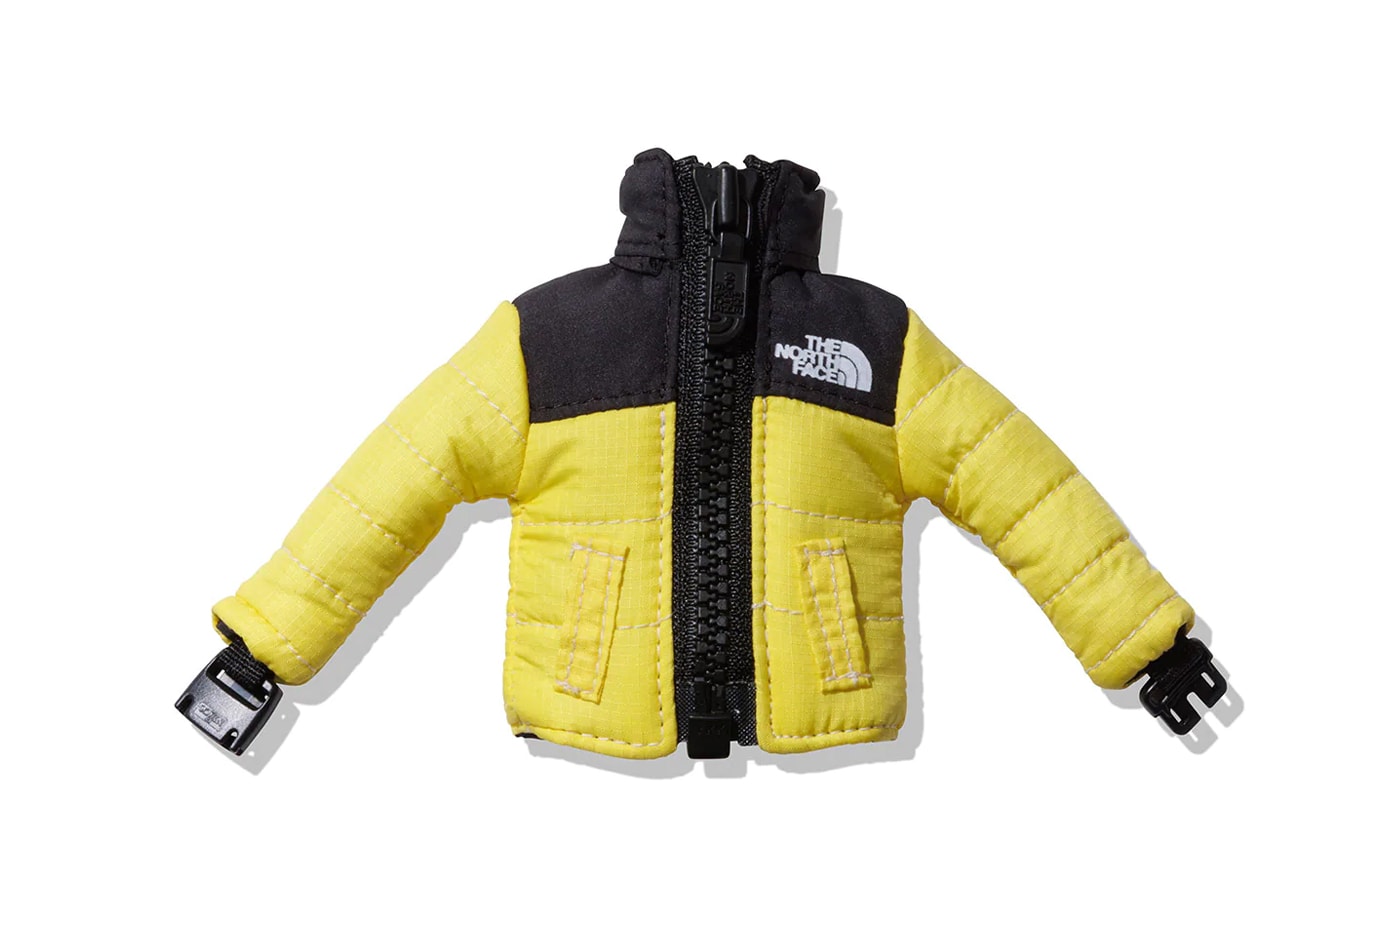 The North Face Face Introduces Mini Nuptse Jacket Keychains black yellow blue green gray sleeve buckle padded playful release info date price 